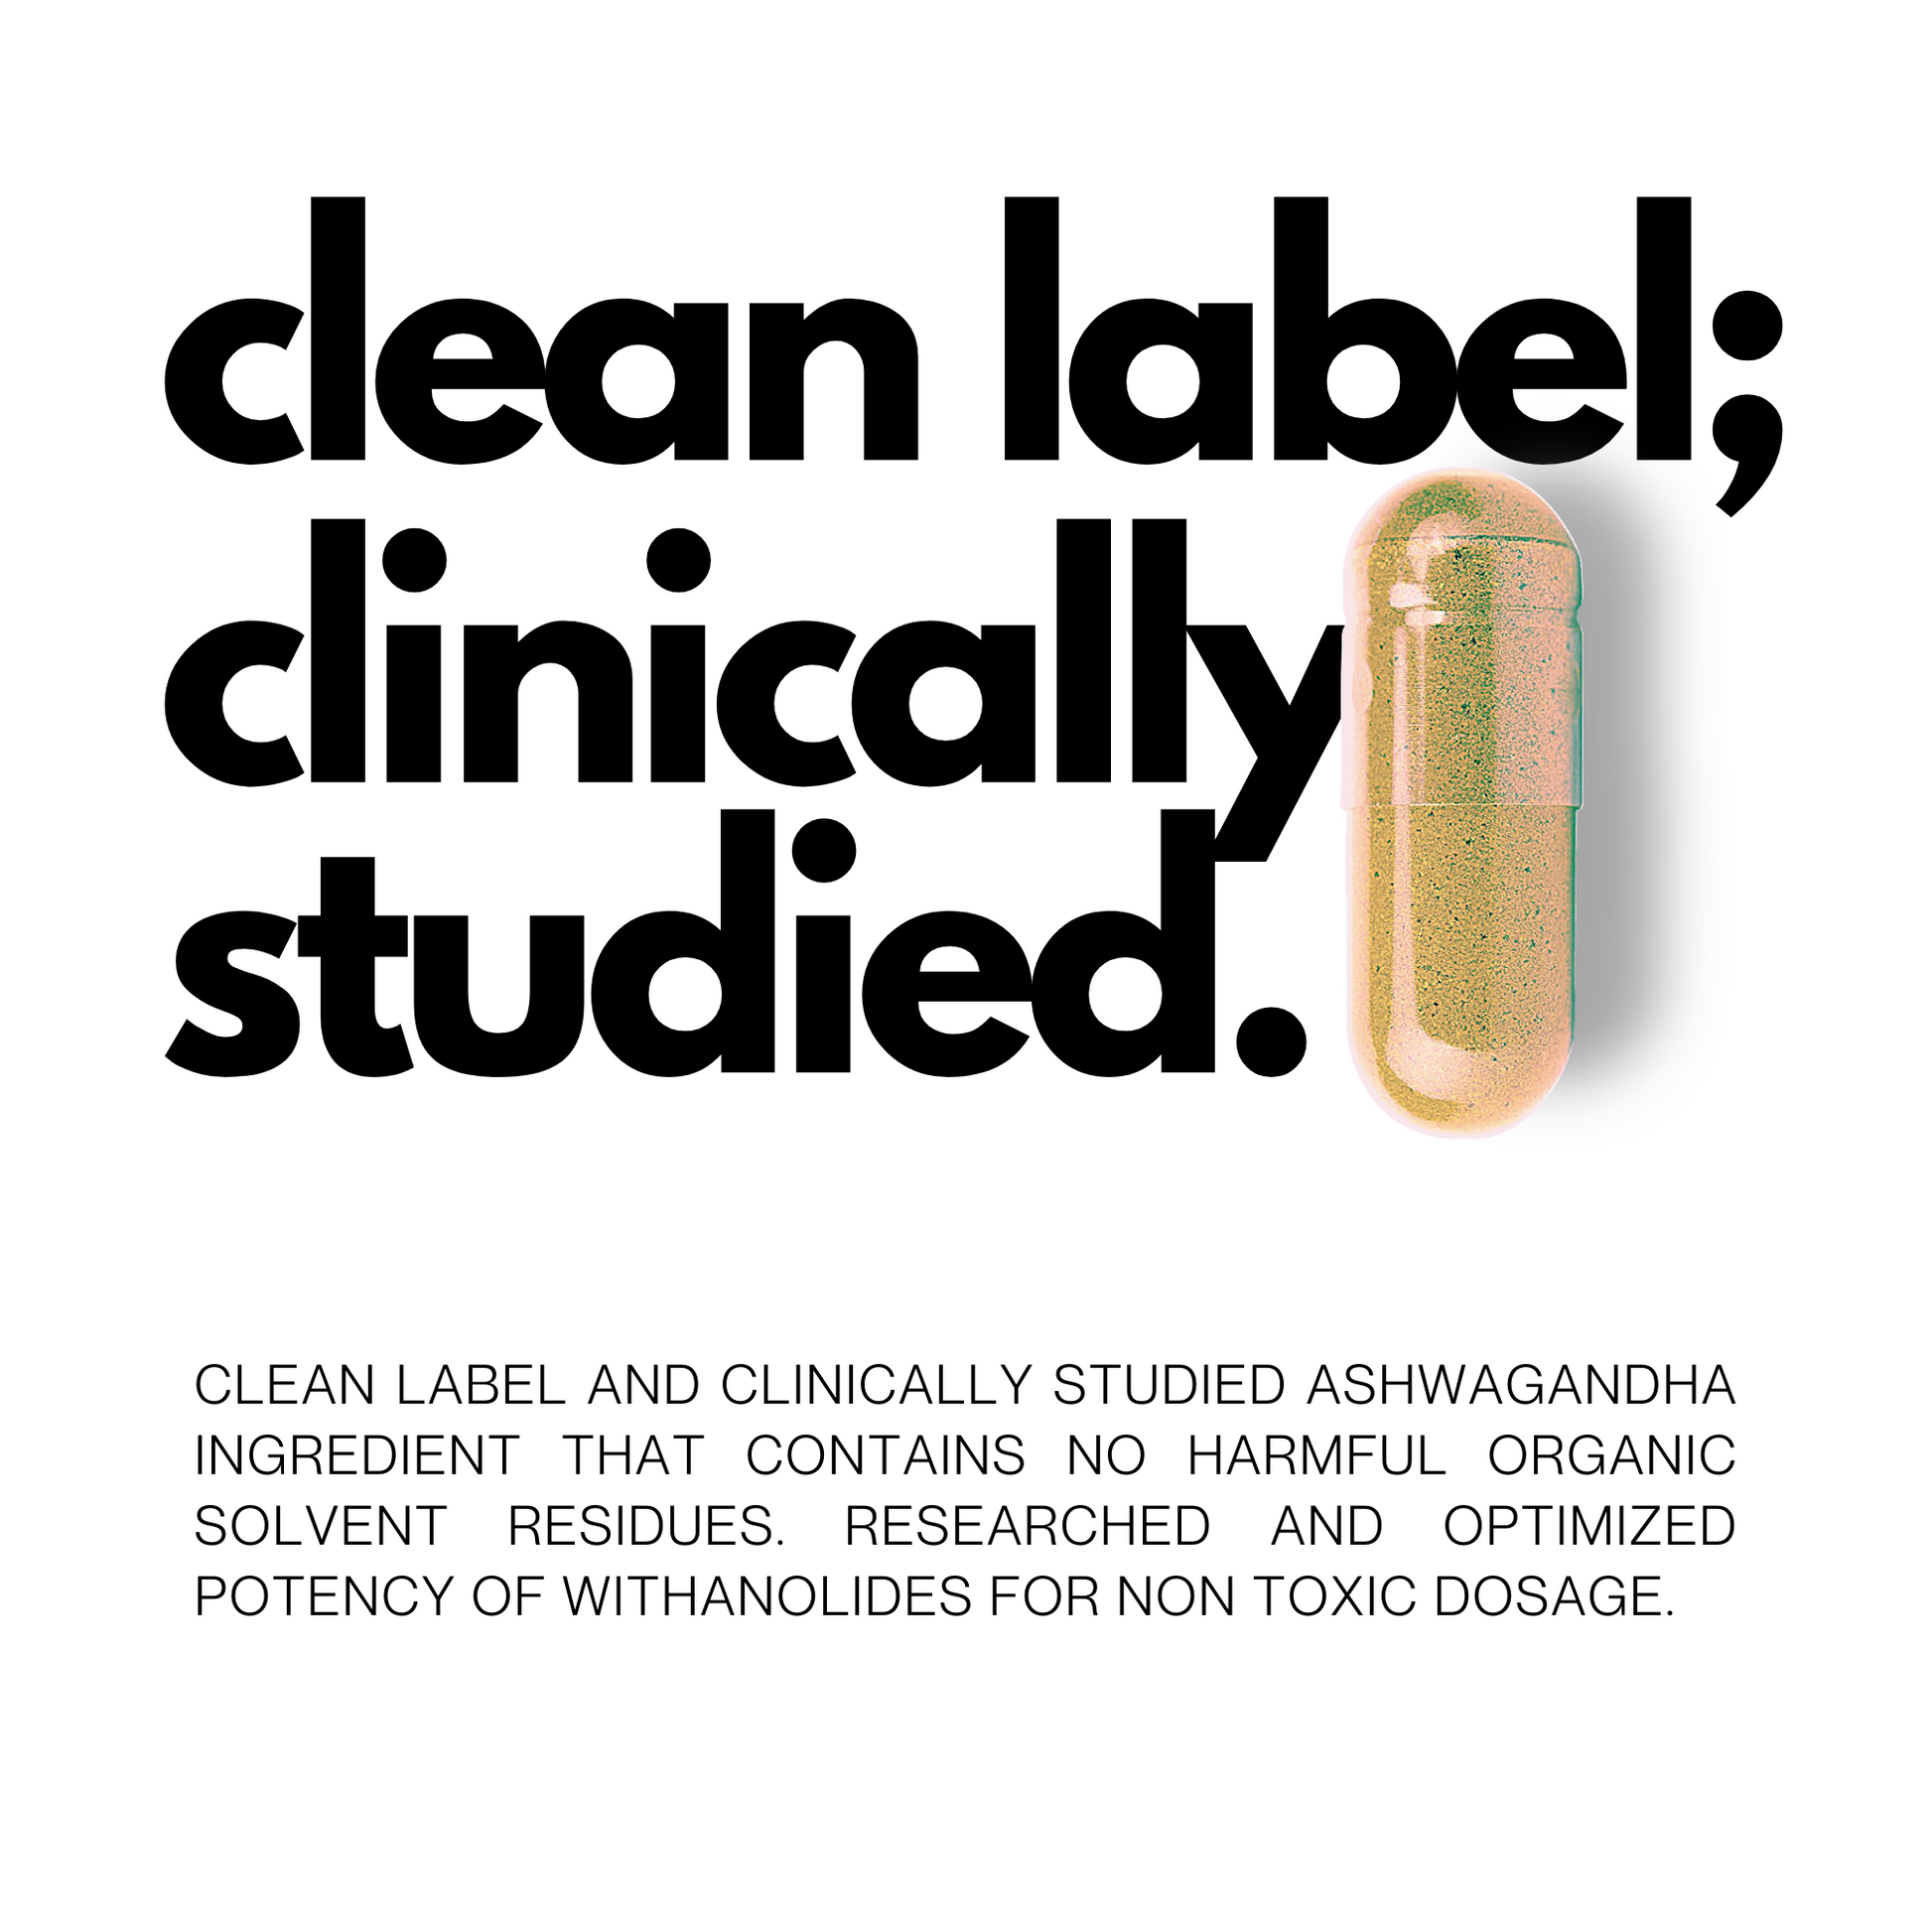 Clean Label Clinically Tested Ashwagandha